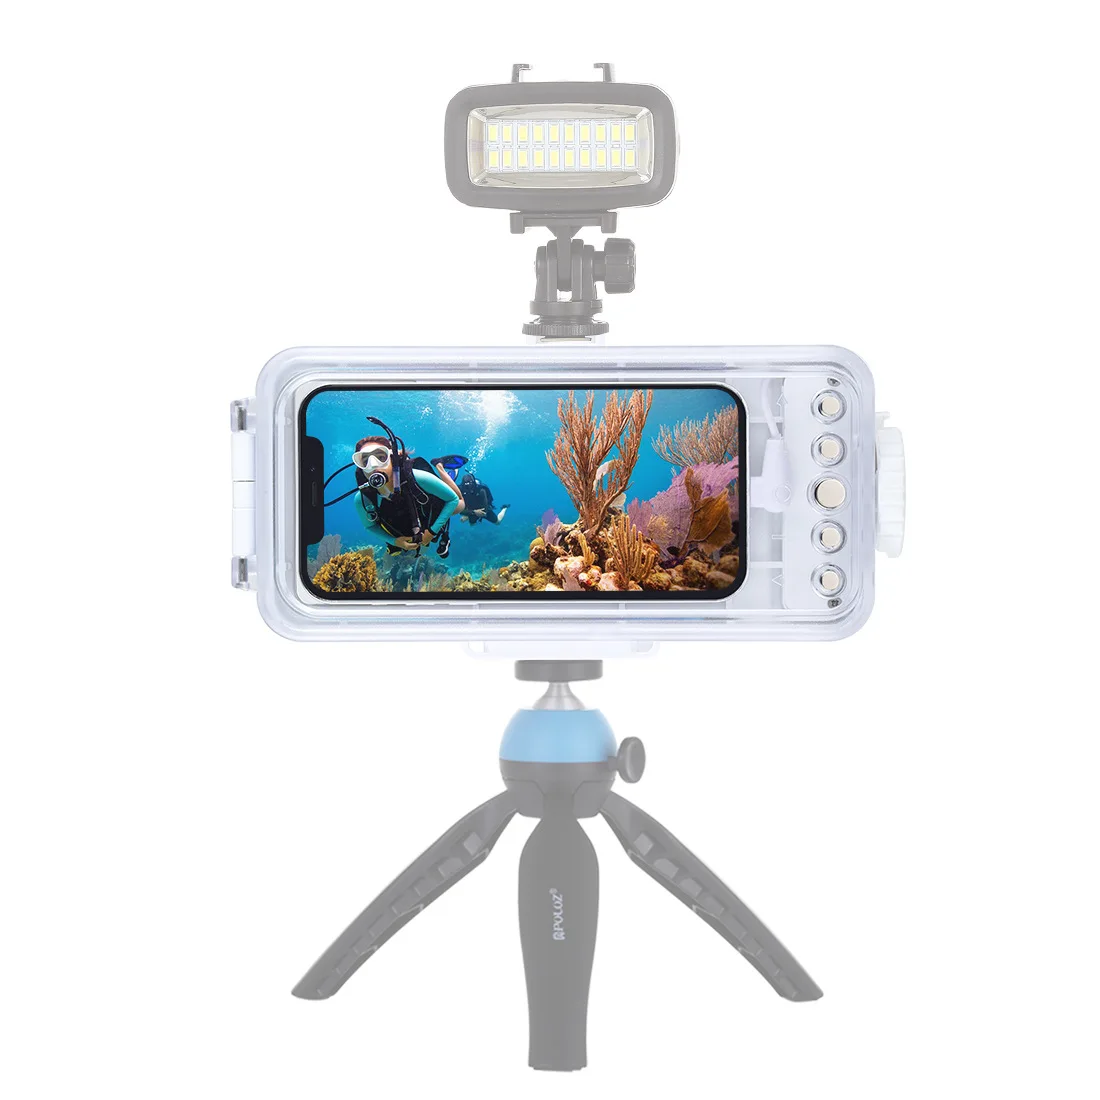 

45m/147ft Waterproof Diving Housing Photo Video Taking Underwater Cover Case for iPhone 13/12 for iOS 13.0 or Above Version